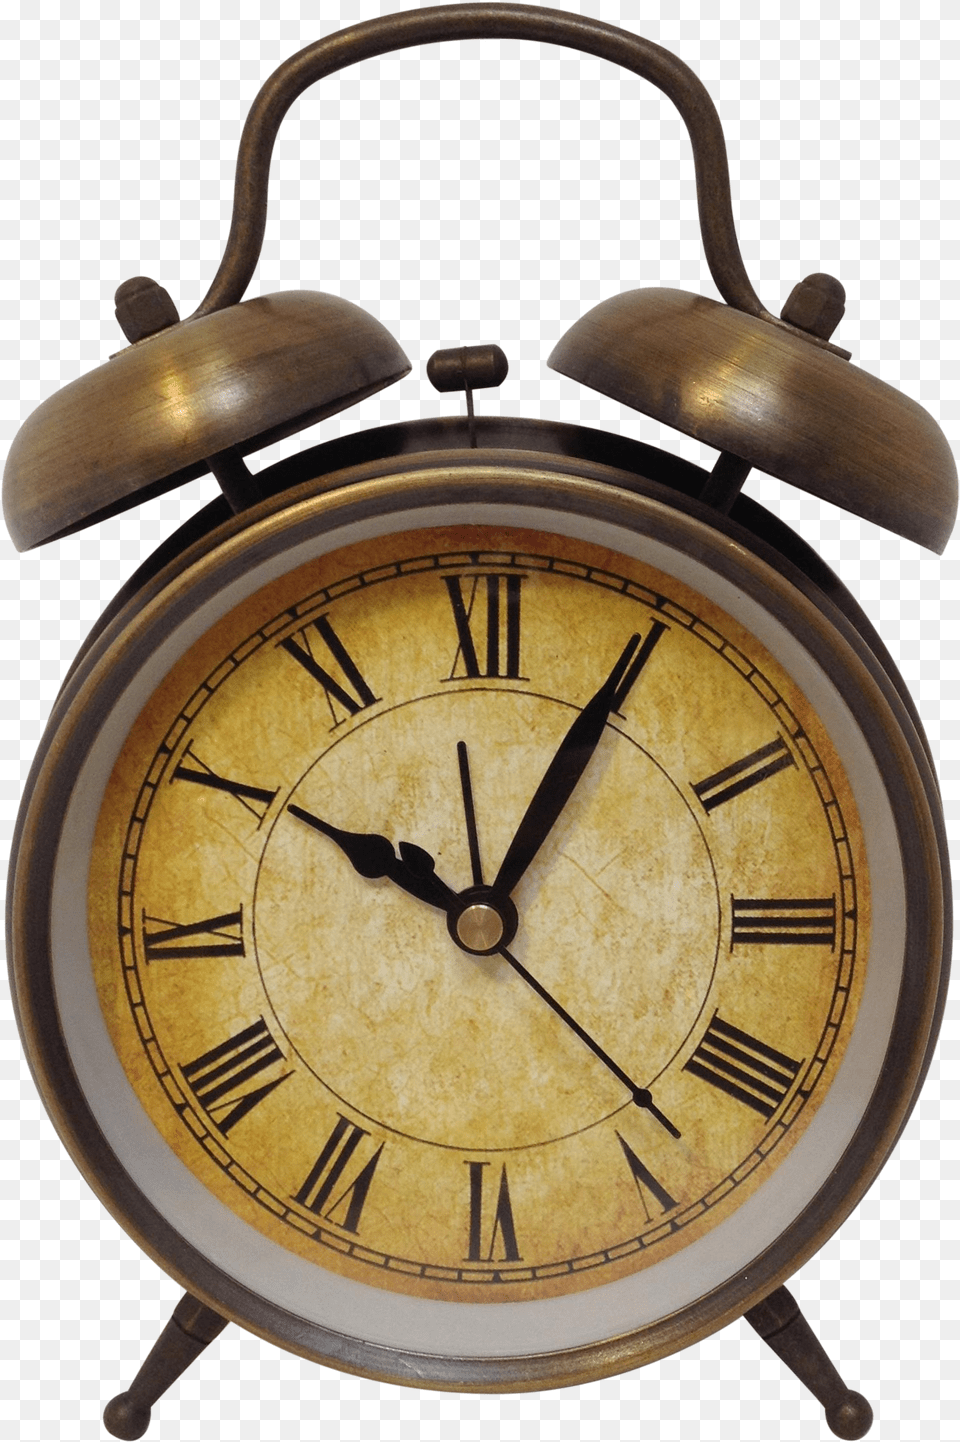 Antique Style Brushed Brass Old Alarm Clock Png Image